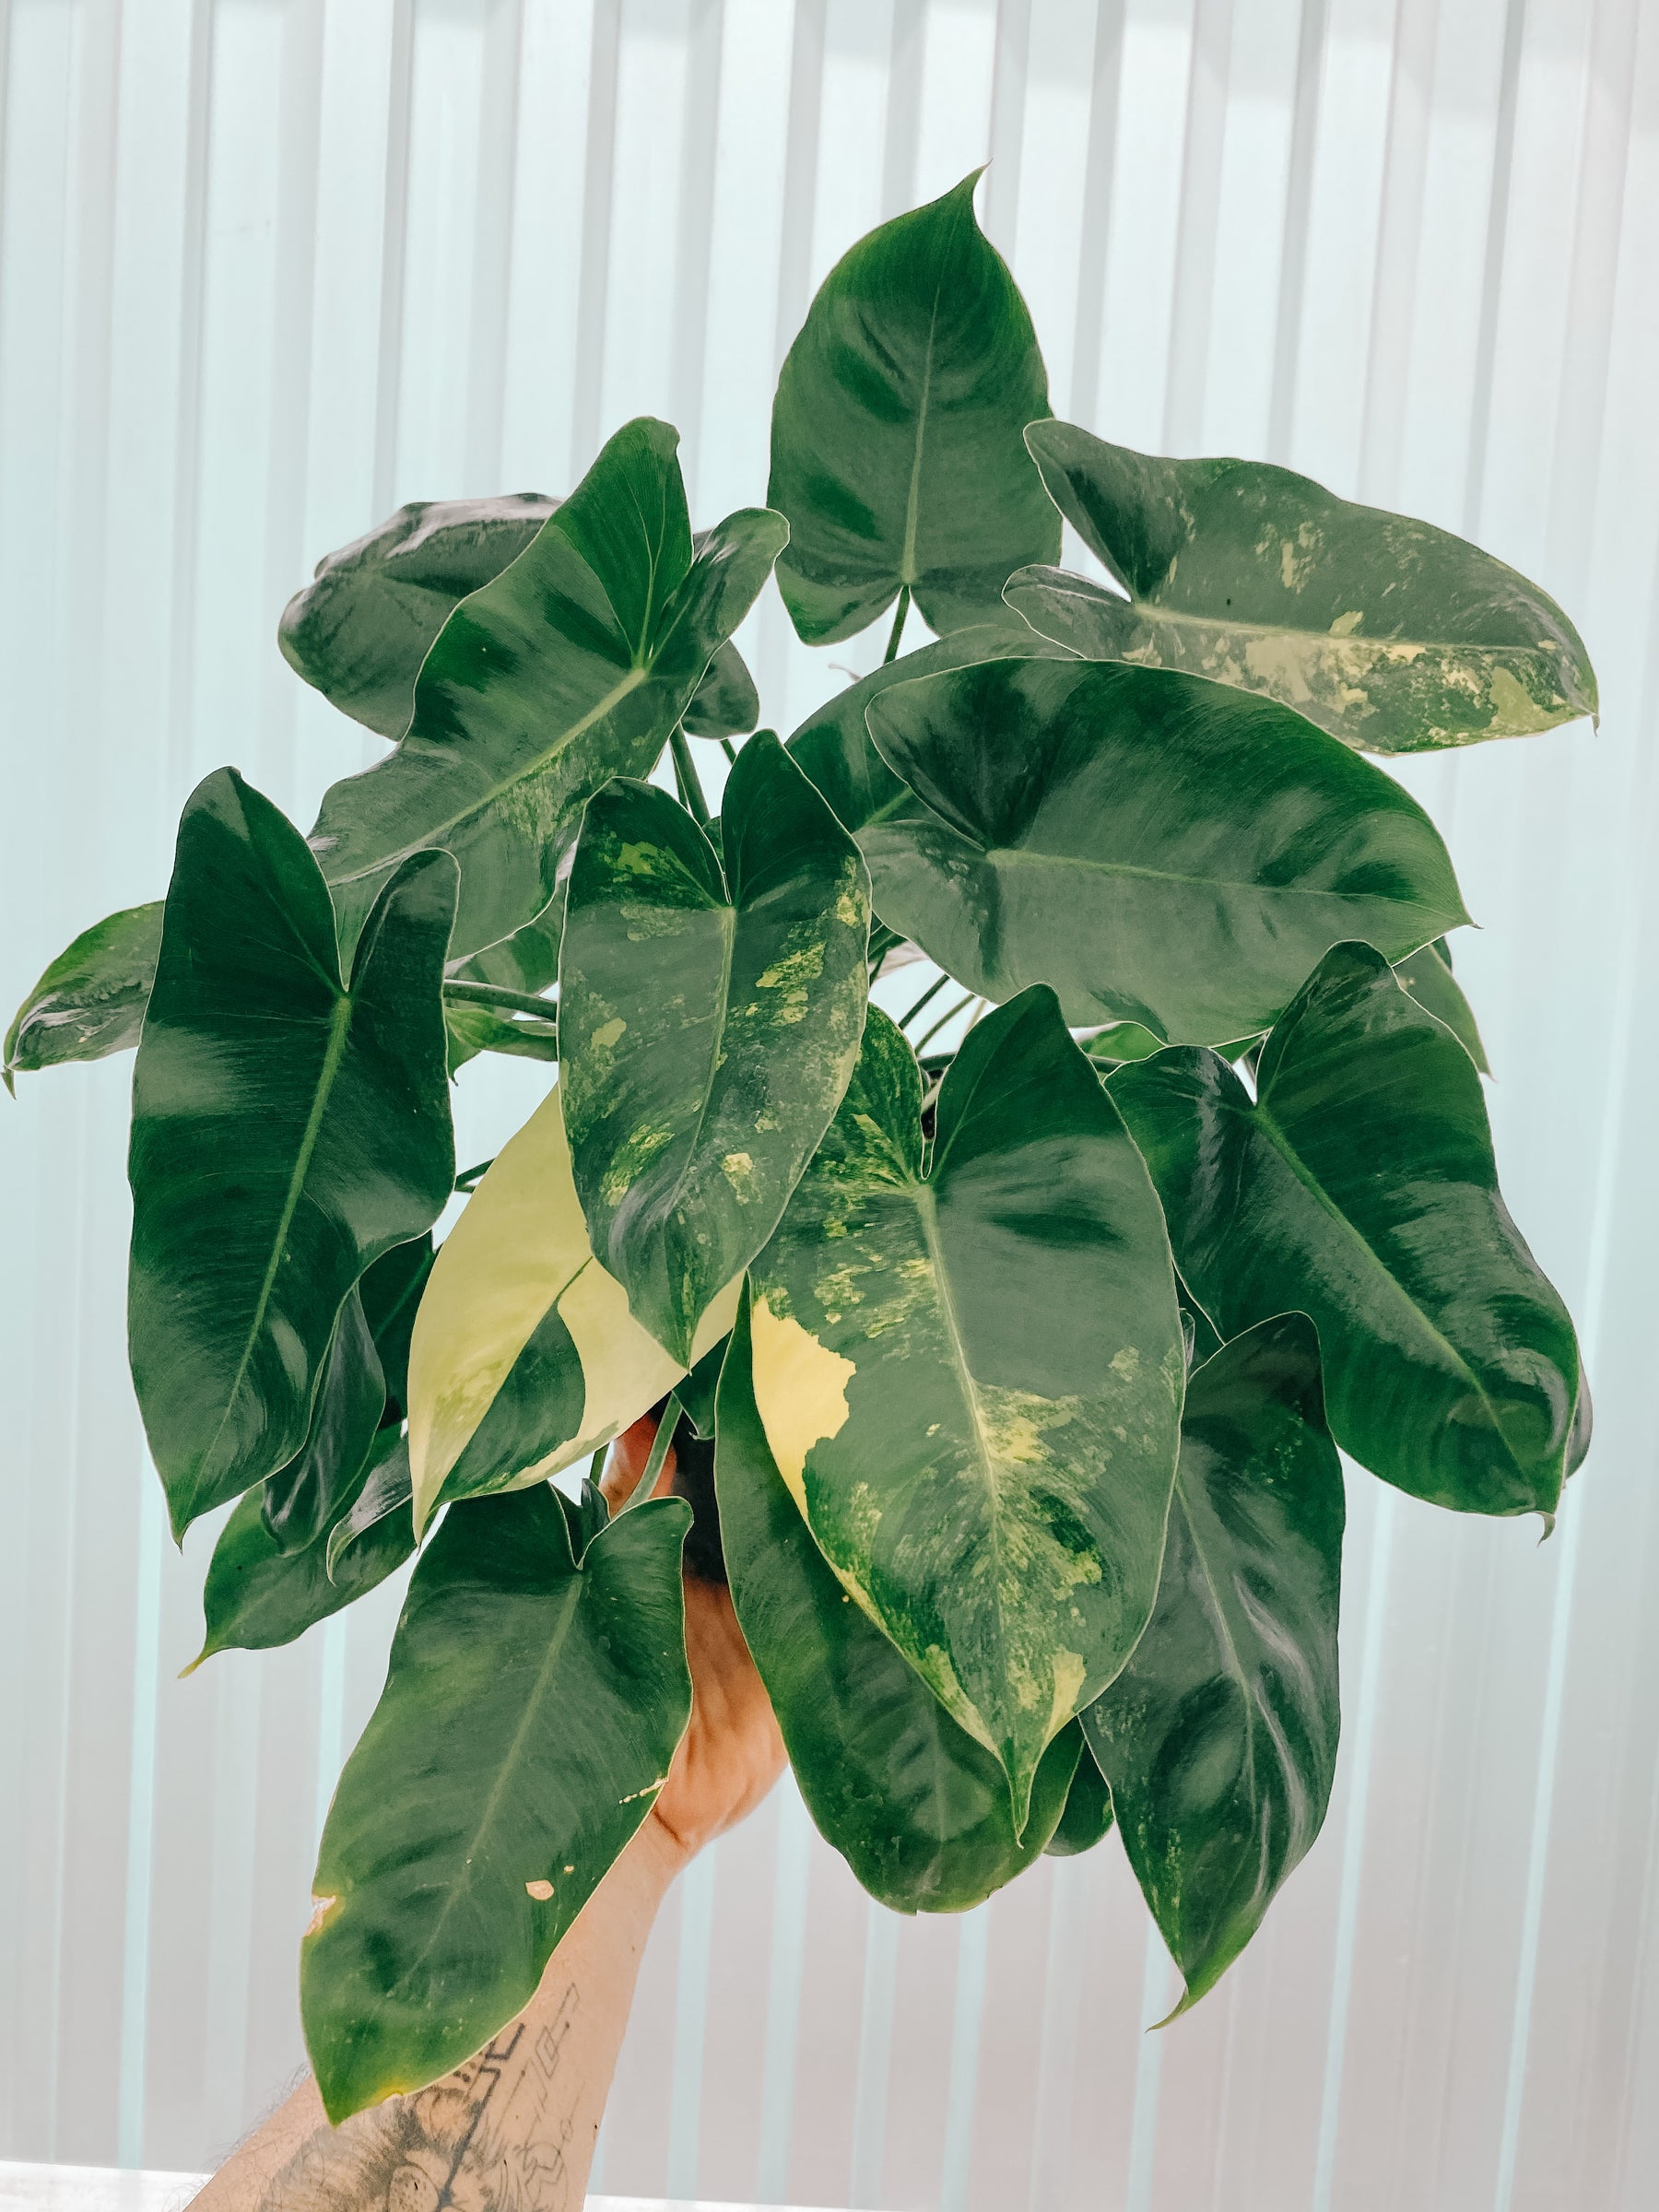 6" Variegated Philodendron 'Burle Marx'